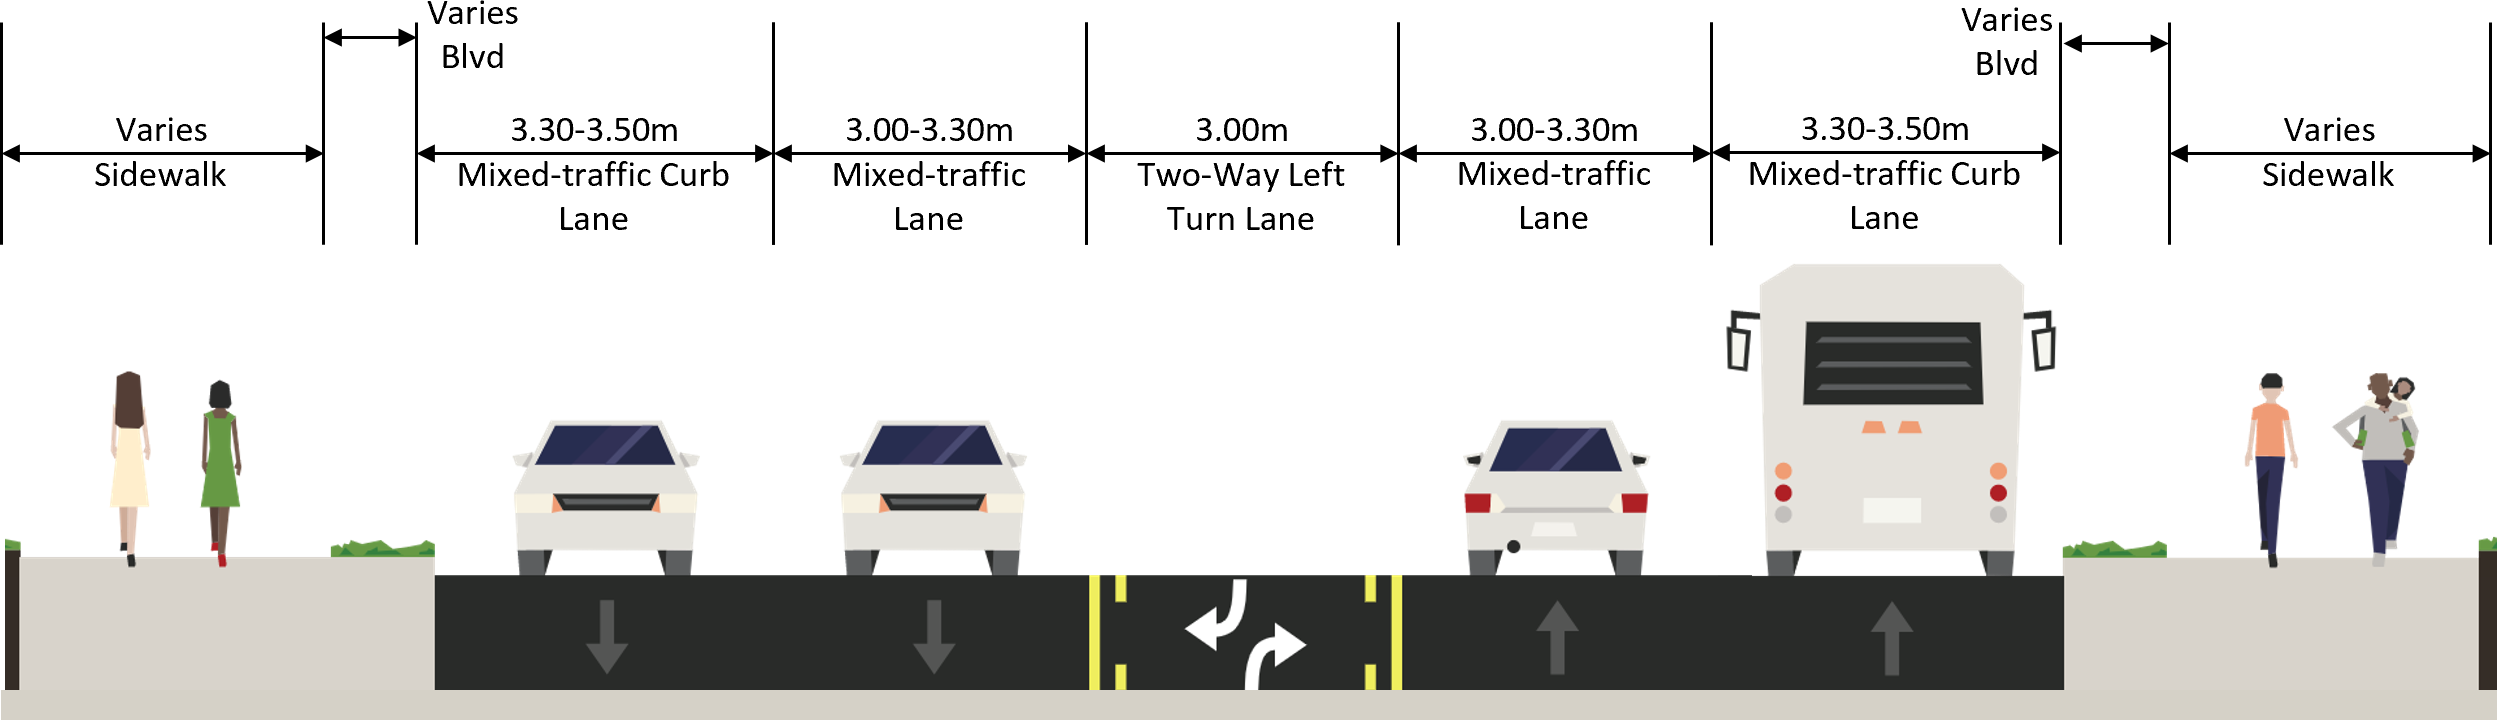 Typical cross-section for Option 1. From left to right: sidewalk, boulevard, mixed-traffic curb lane, mixed-traffic lane, two-way left turn lane, mixed-traffic lane, mixed-traffic curb lane, boulevard and sidewalk.